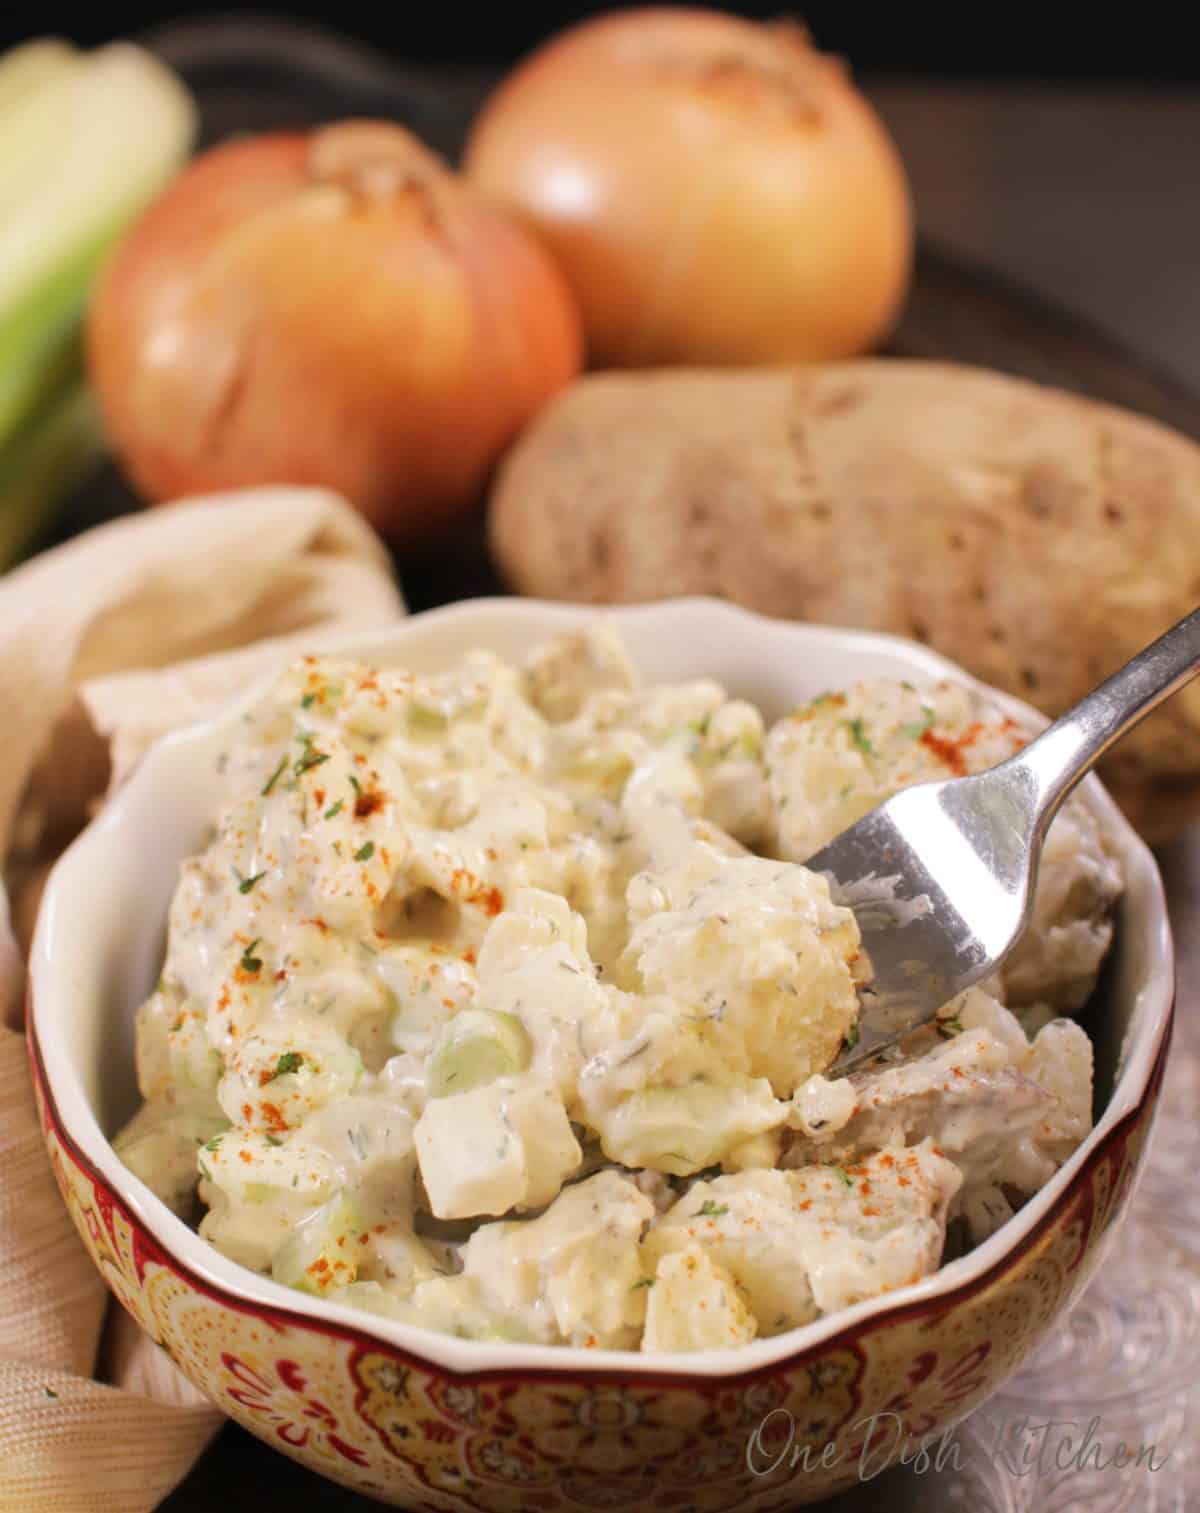 A fork filled with potato salad from a small bowl next to a russet potato, and two onions all on a metal tray